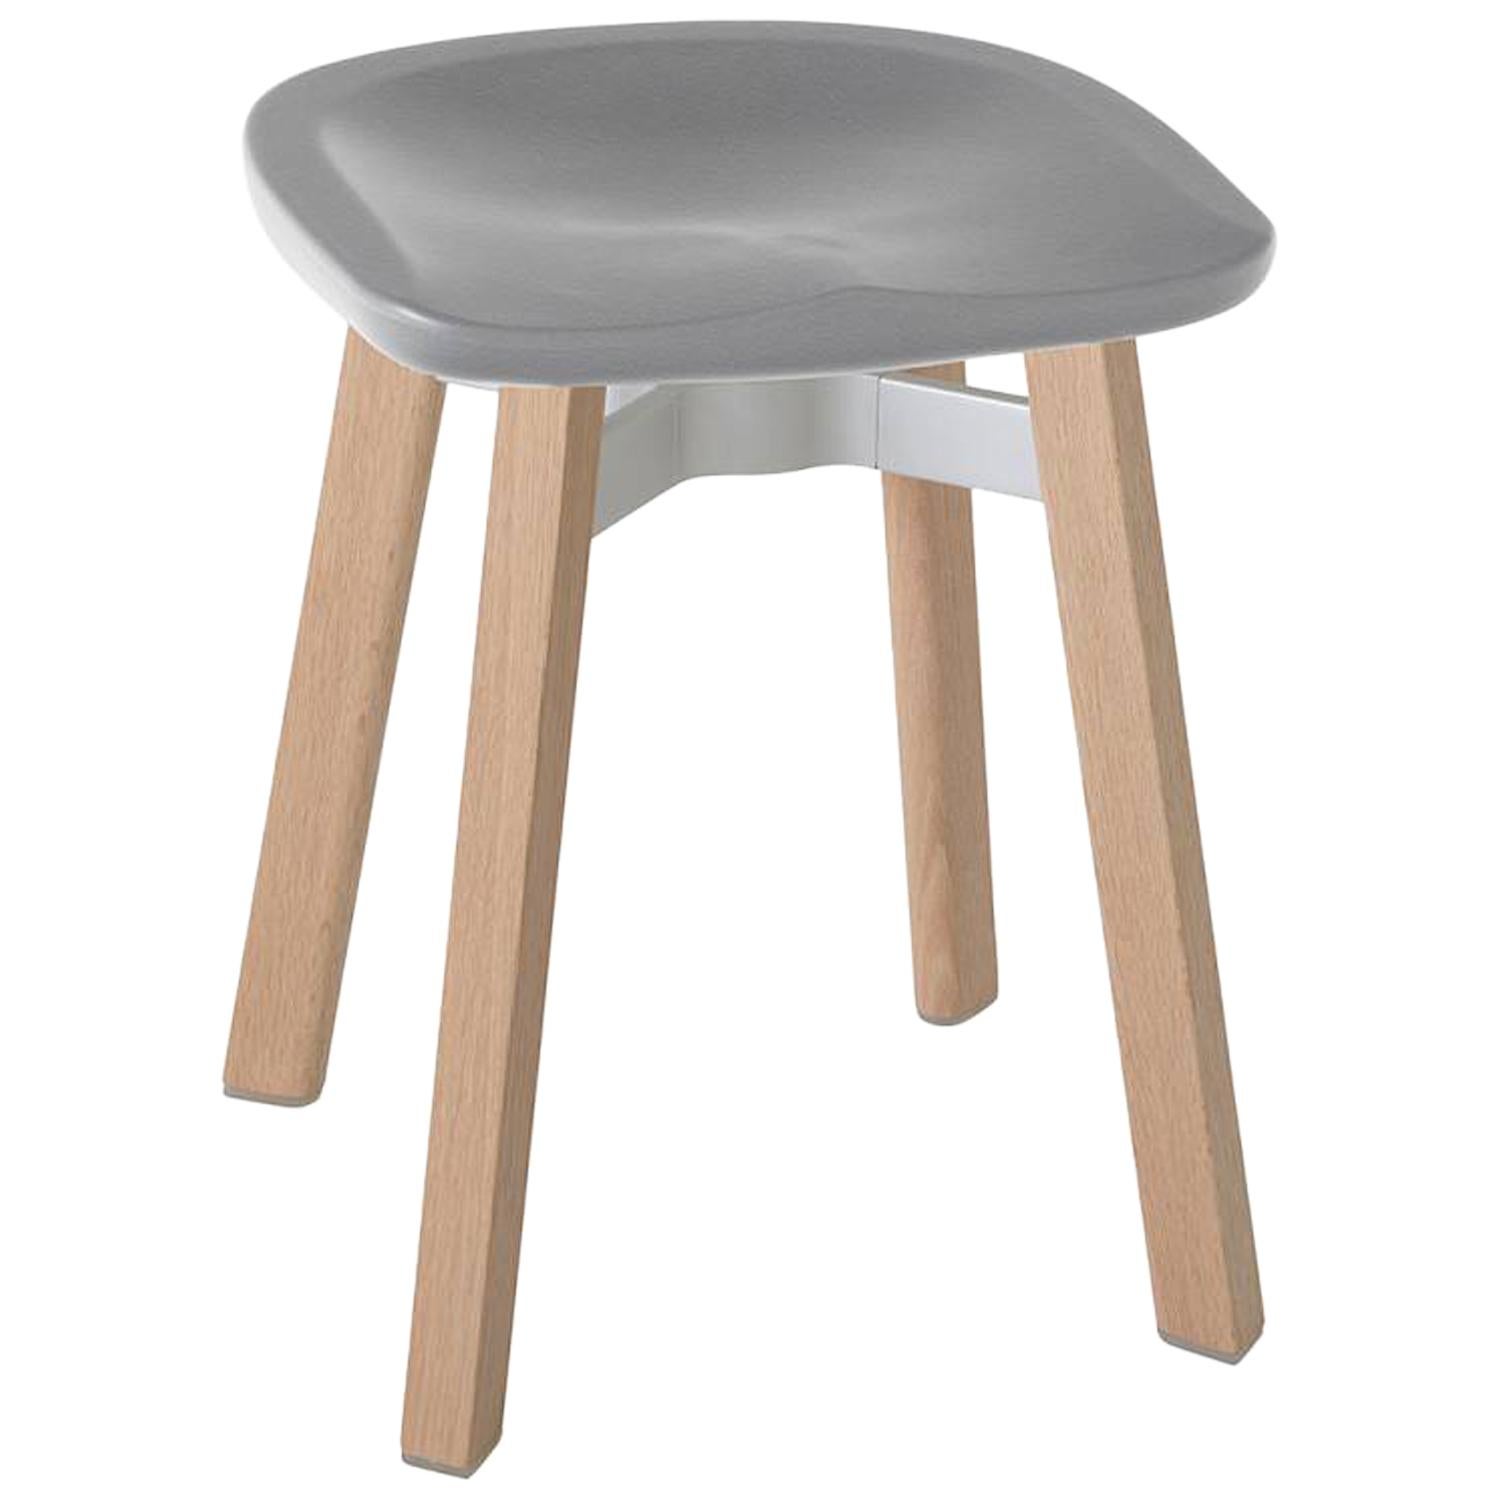 Emeco Su Small Stool in Wood with Flint Seat by Nendo